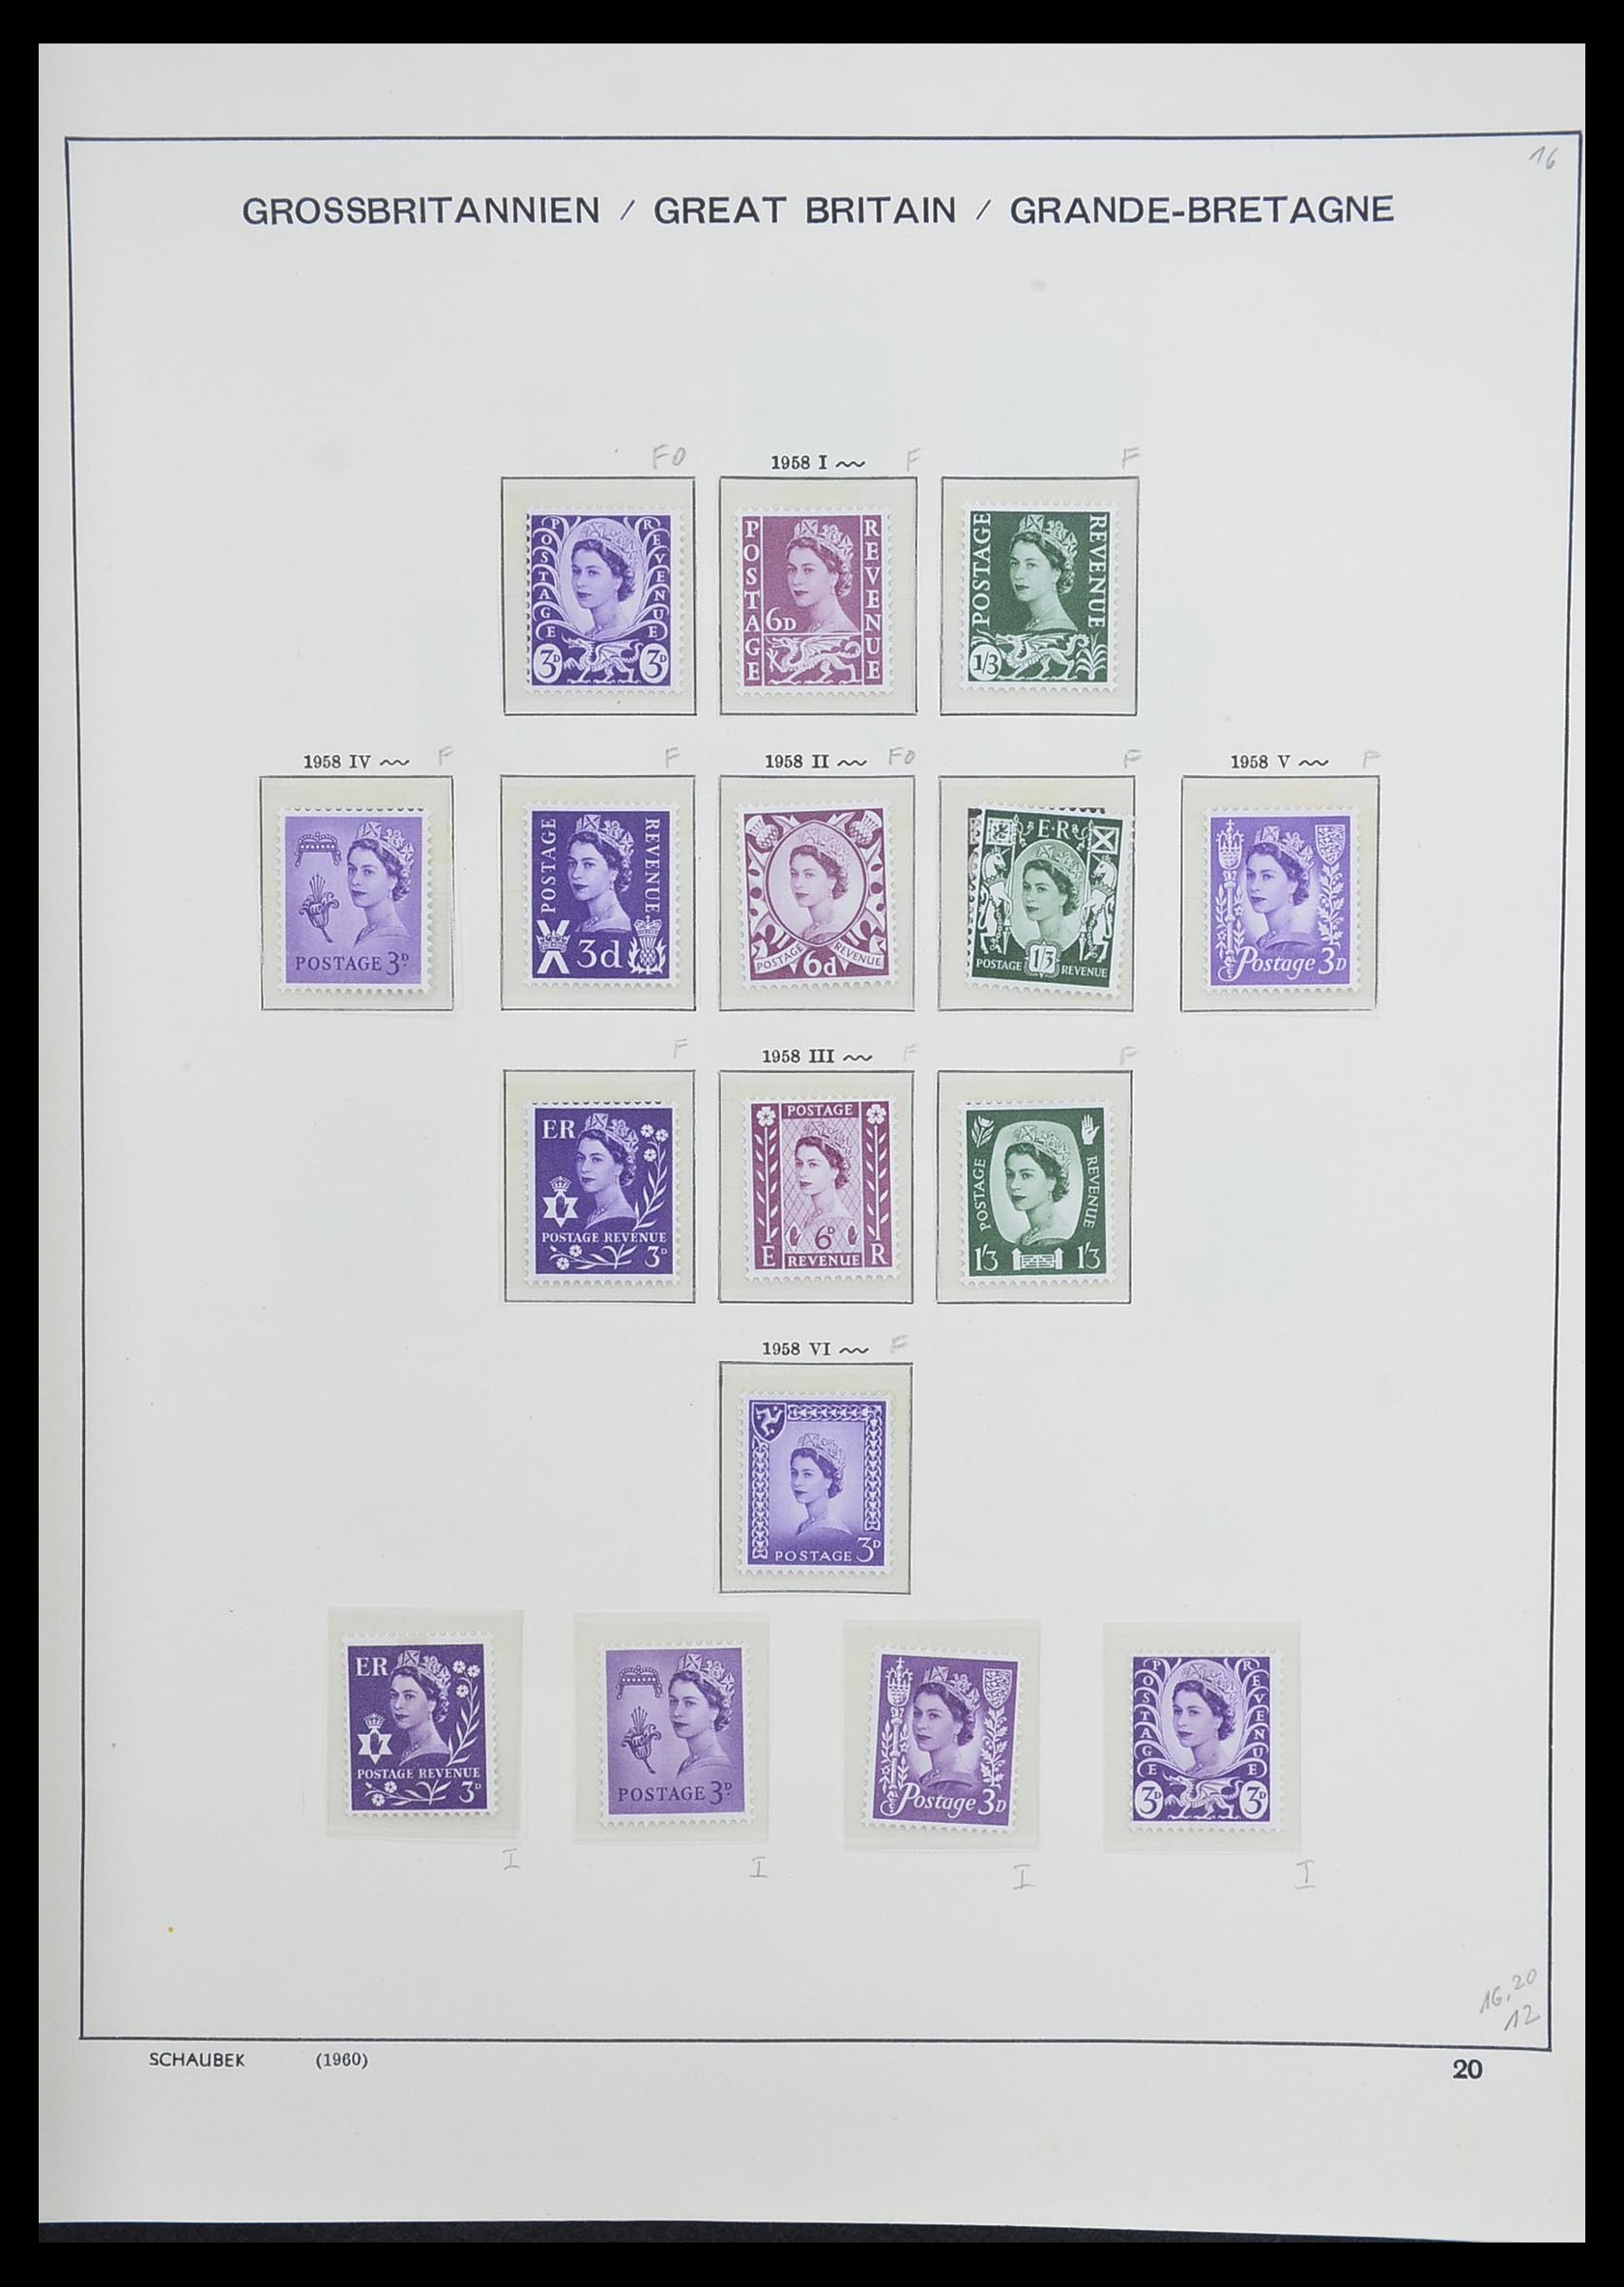 33250 022 - Stamp collection 33250 Great Britain 1841-1995.